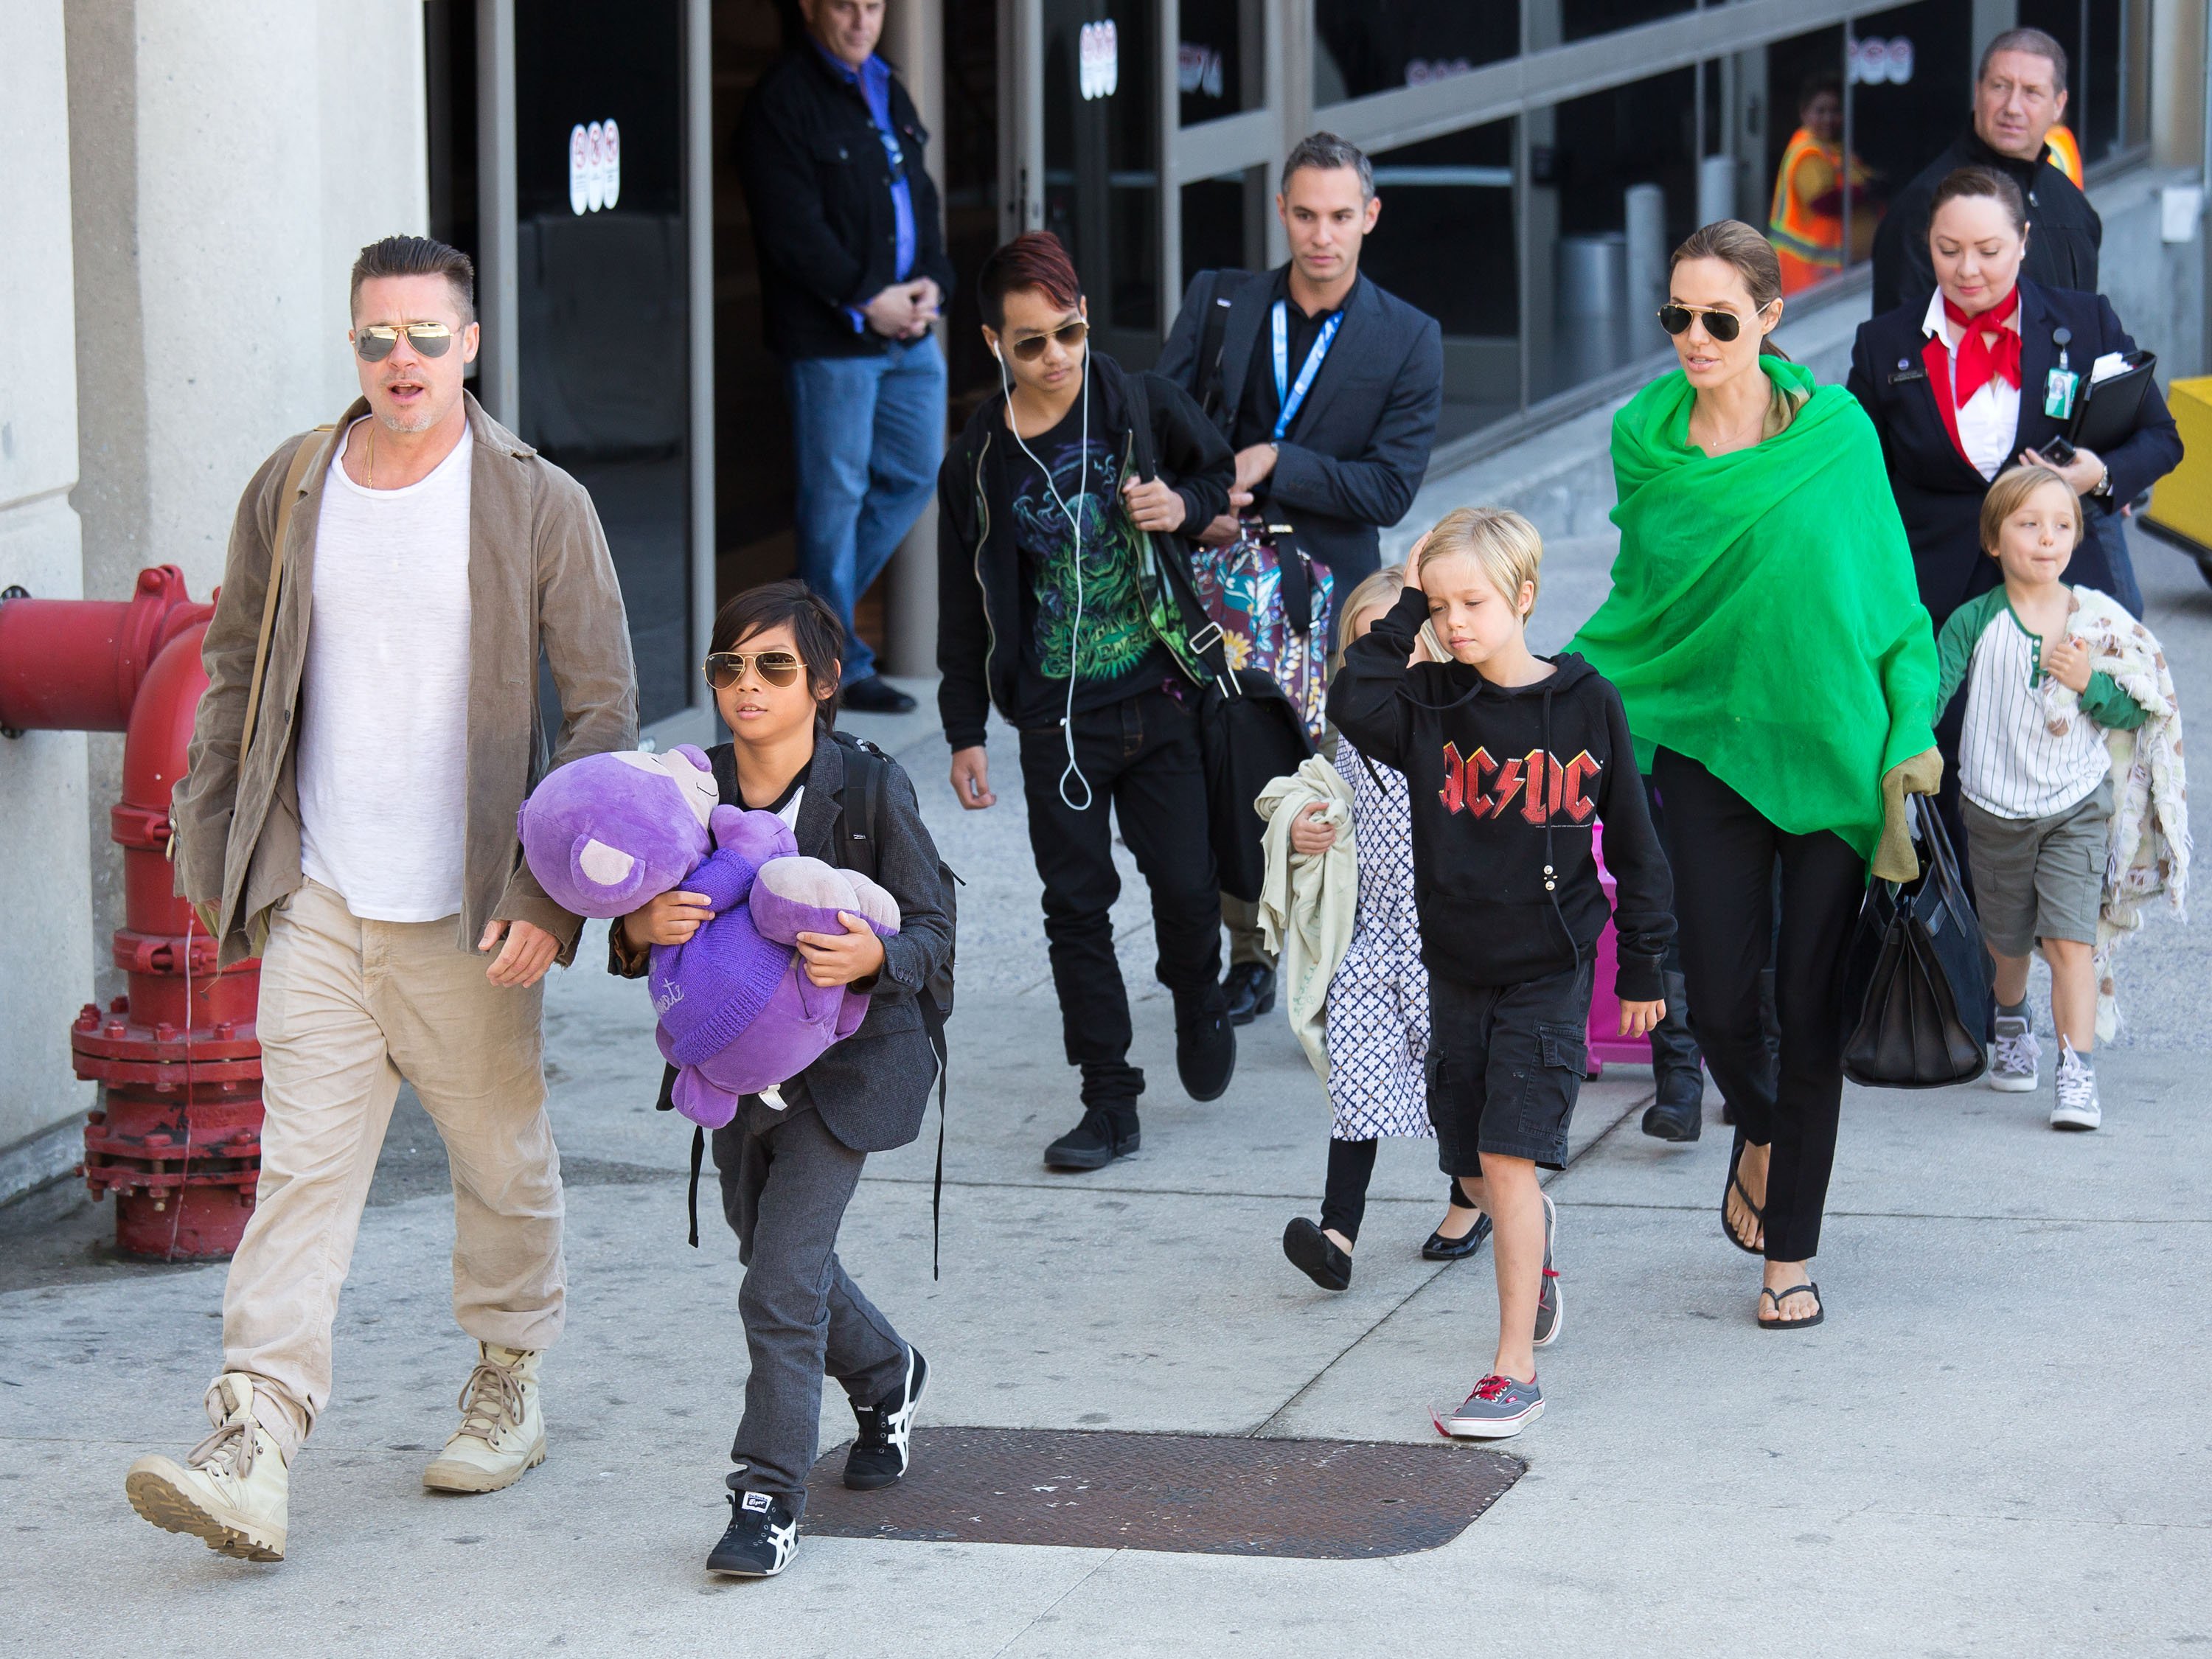 Brad Pitt and Angelina Jolie are seen after landing at Los Angeles International Airport with their children, Pax Jolie-Pitt, Maddox Jolie-Pitt, Shiloh Jolie-Pitt, Vivienne Jolie-Pitt and Knox Jolie-Pitt on February 05, 2014 in Los Angeles, California | Source: Getty Images 